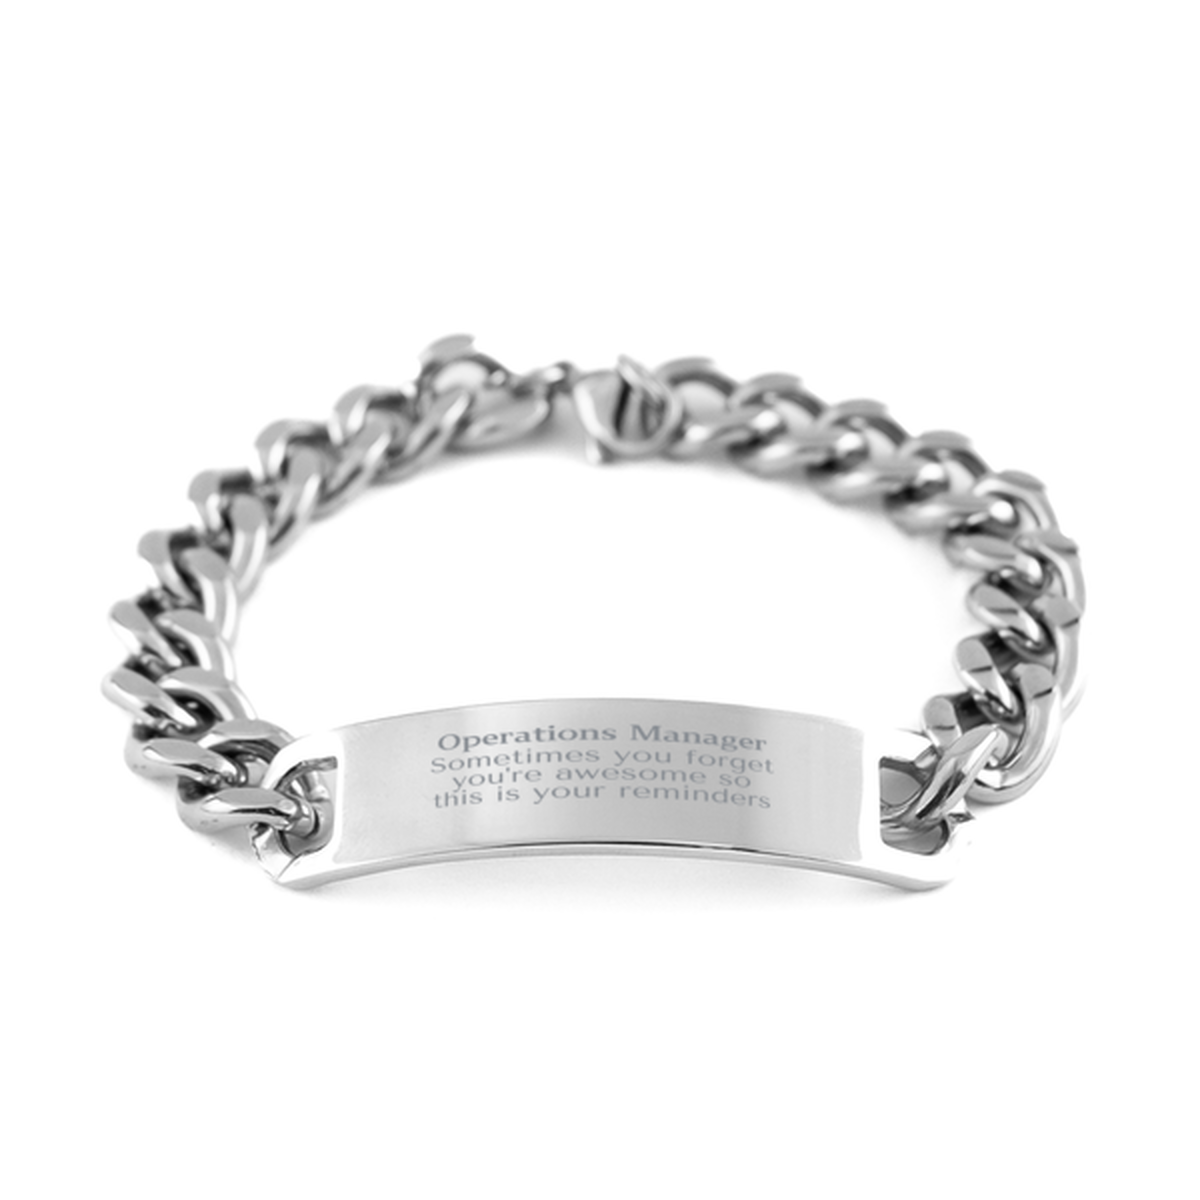 Sentimental Operations Manager Cuban Chain Stainless Steel Bracelet, Operations Manager Sometimes you forget you're awesome so this is your reminders, Graduation Christmas Birthday Gifts for Operations Manager, Men, Women, Coworkers